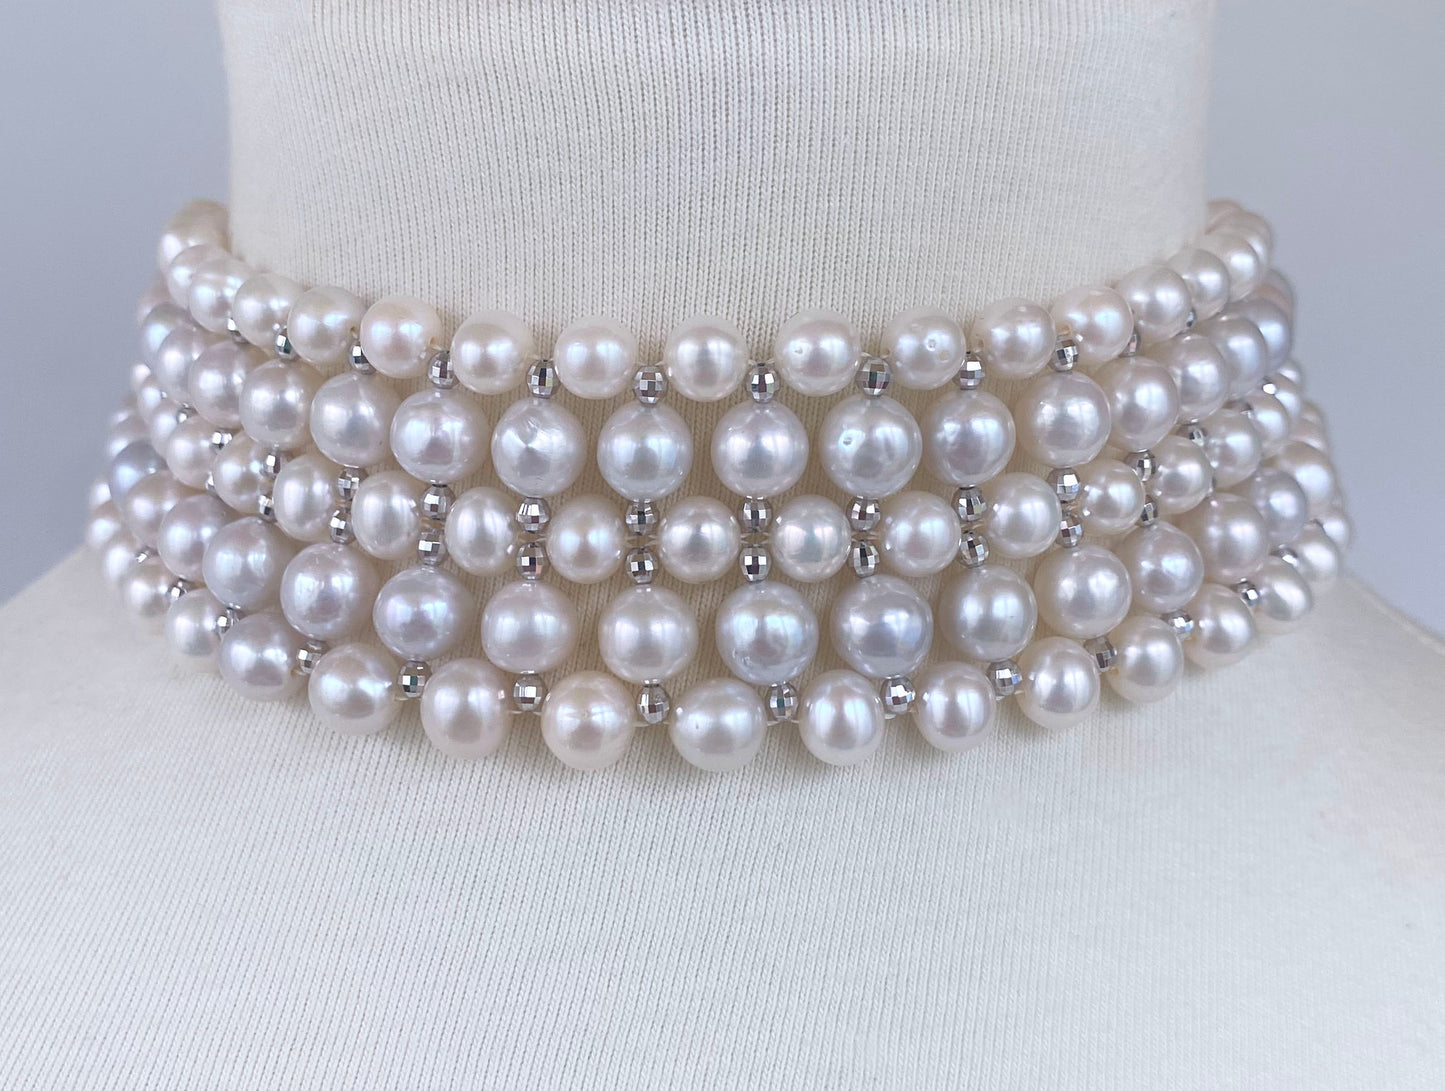 Woven Pearl Choker with Gold Plated Disco Accents & Decorative Clasp